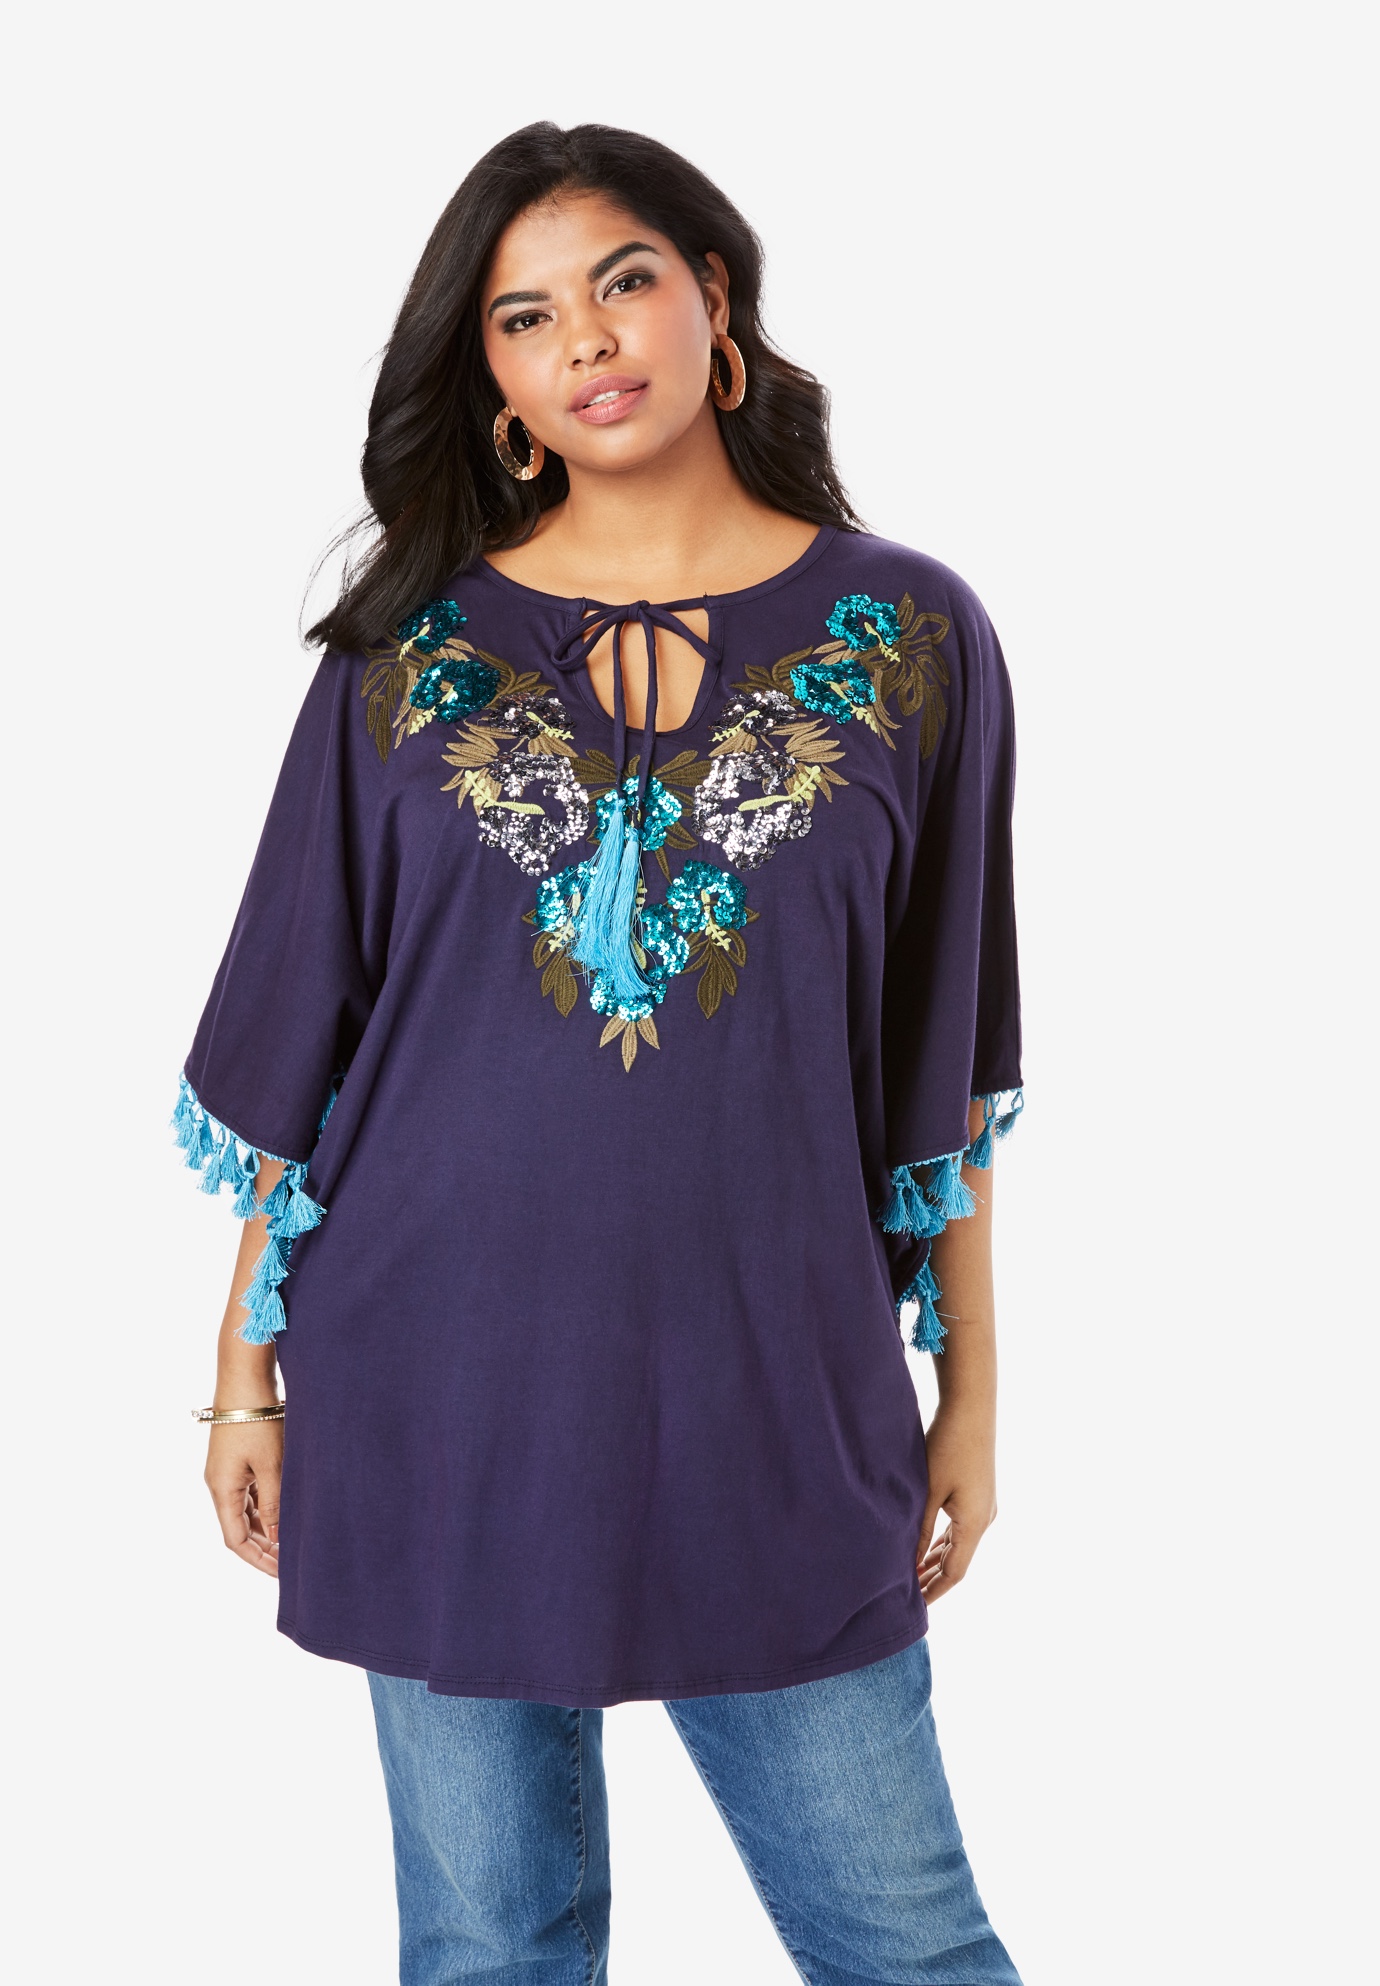 Embellished Tunic | Fullbeauty Outlet